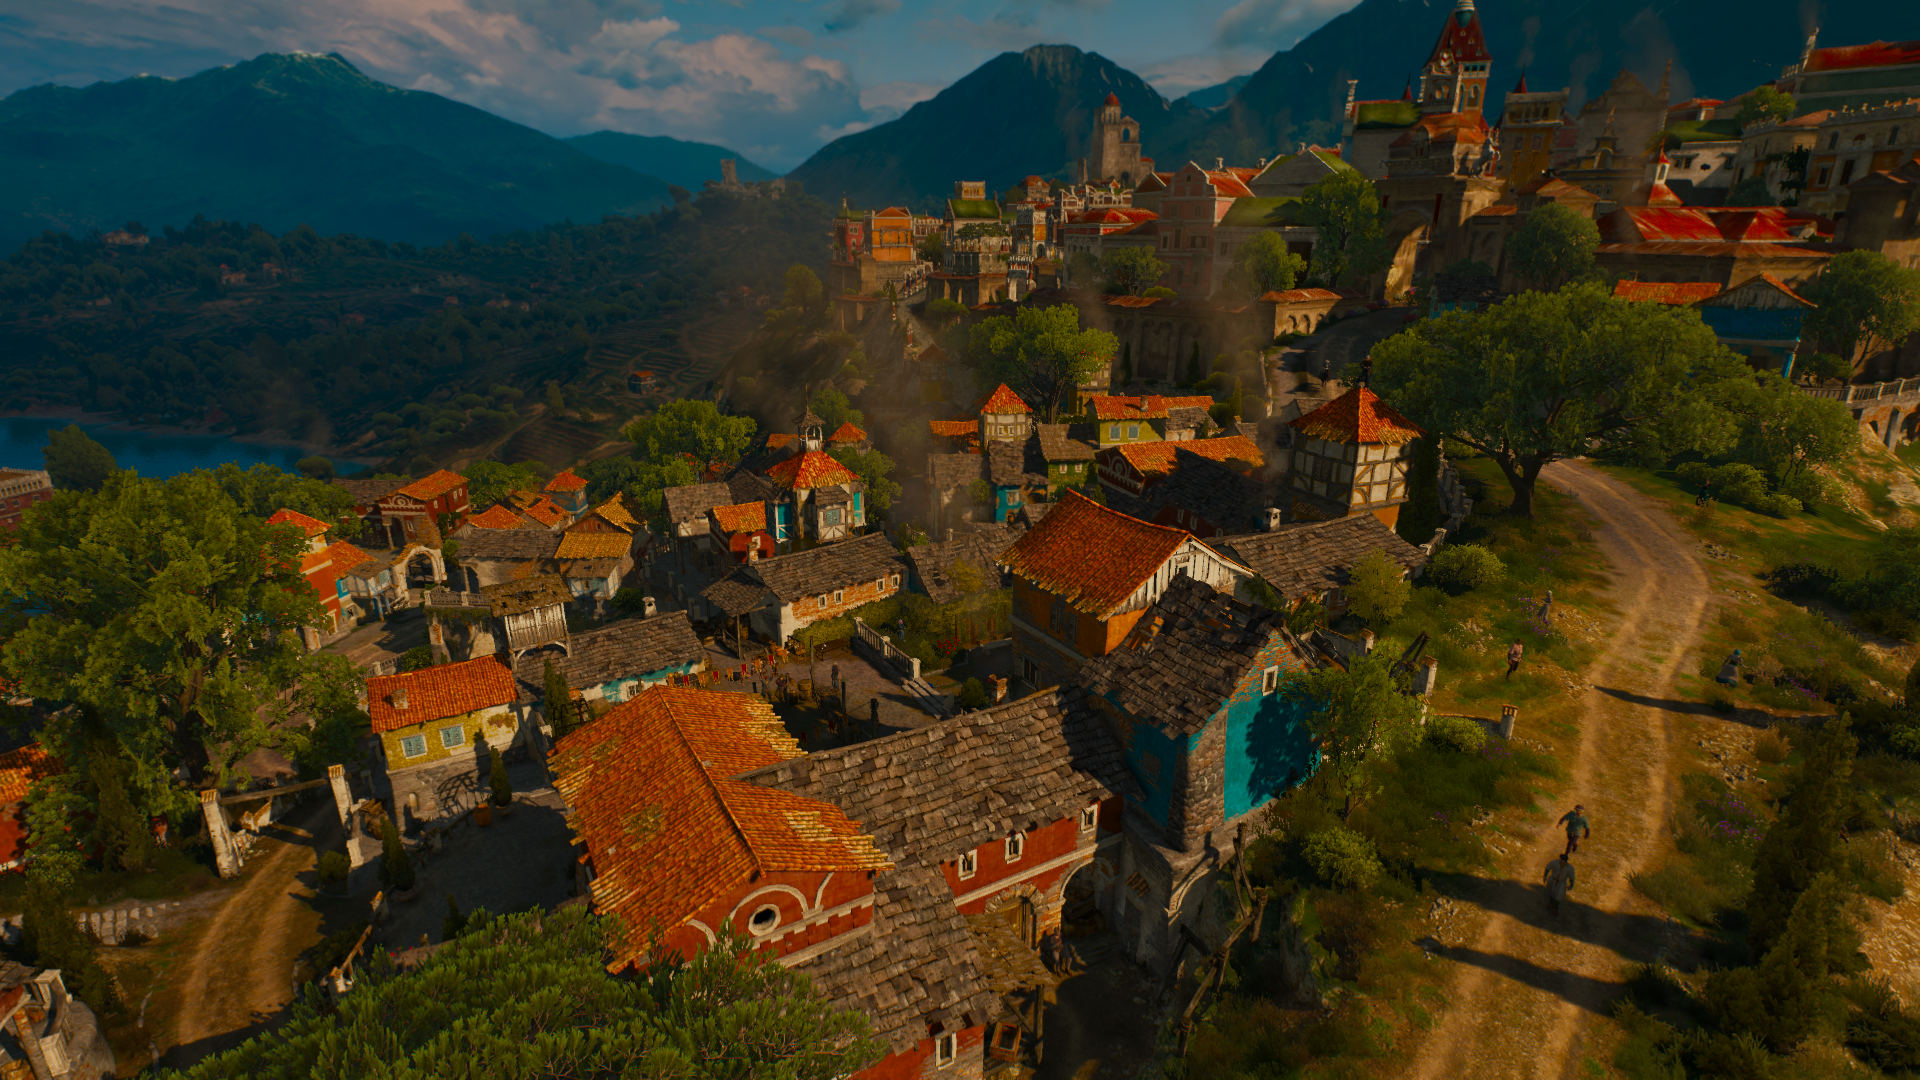 General 1920x1080 The Witcher The Witcher 3: Wild Hunt - Blood and Wine video game art video game landscape